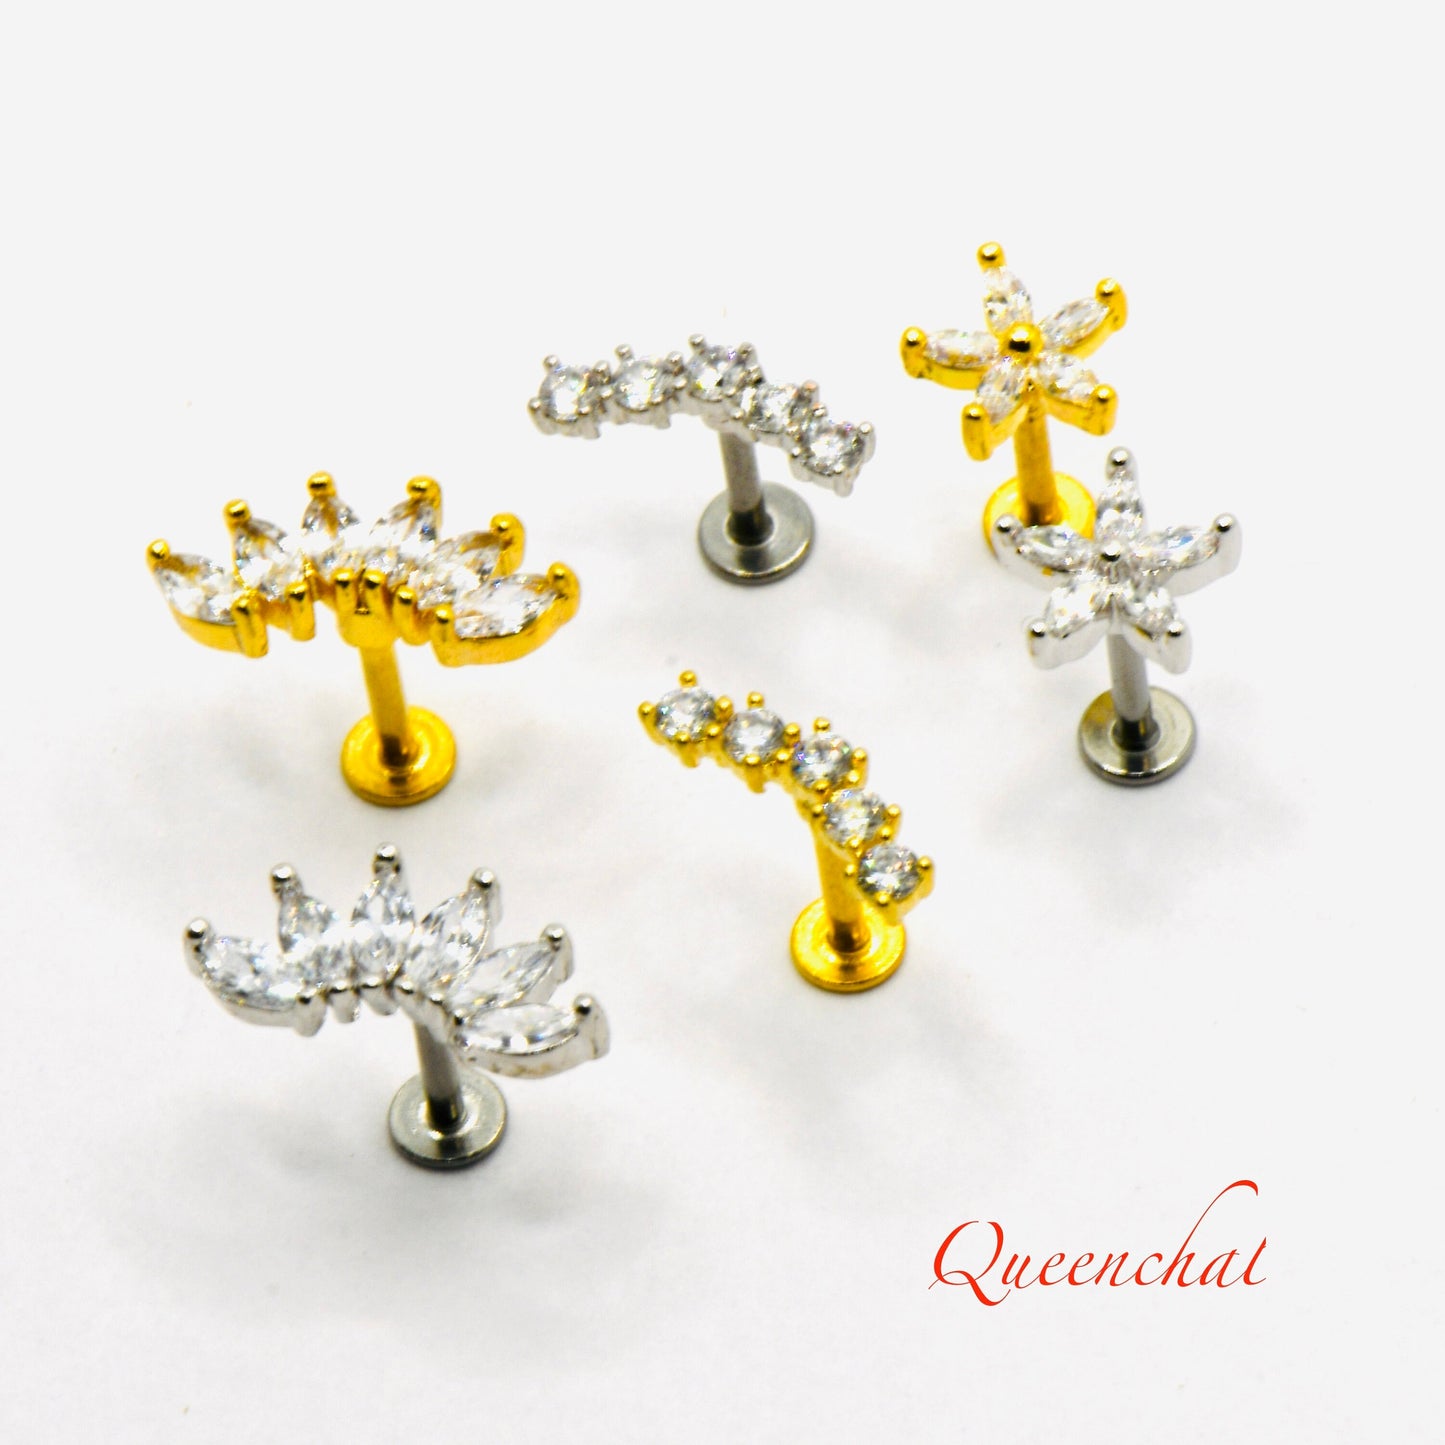 16G 316L Surgical Steel Clear CZ Floral Labret Stud Earring, Upper Helix, Cartilage Labret Body Piercing Jewellery